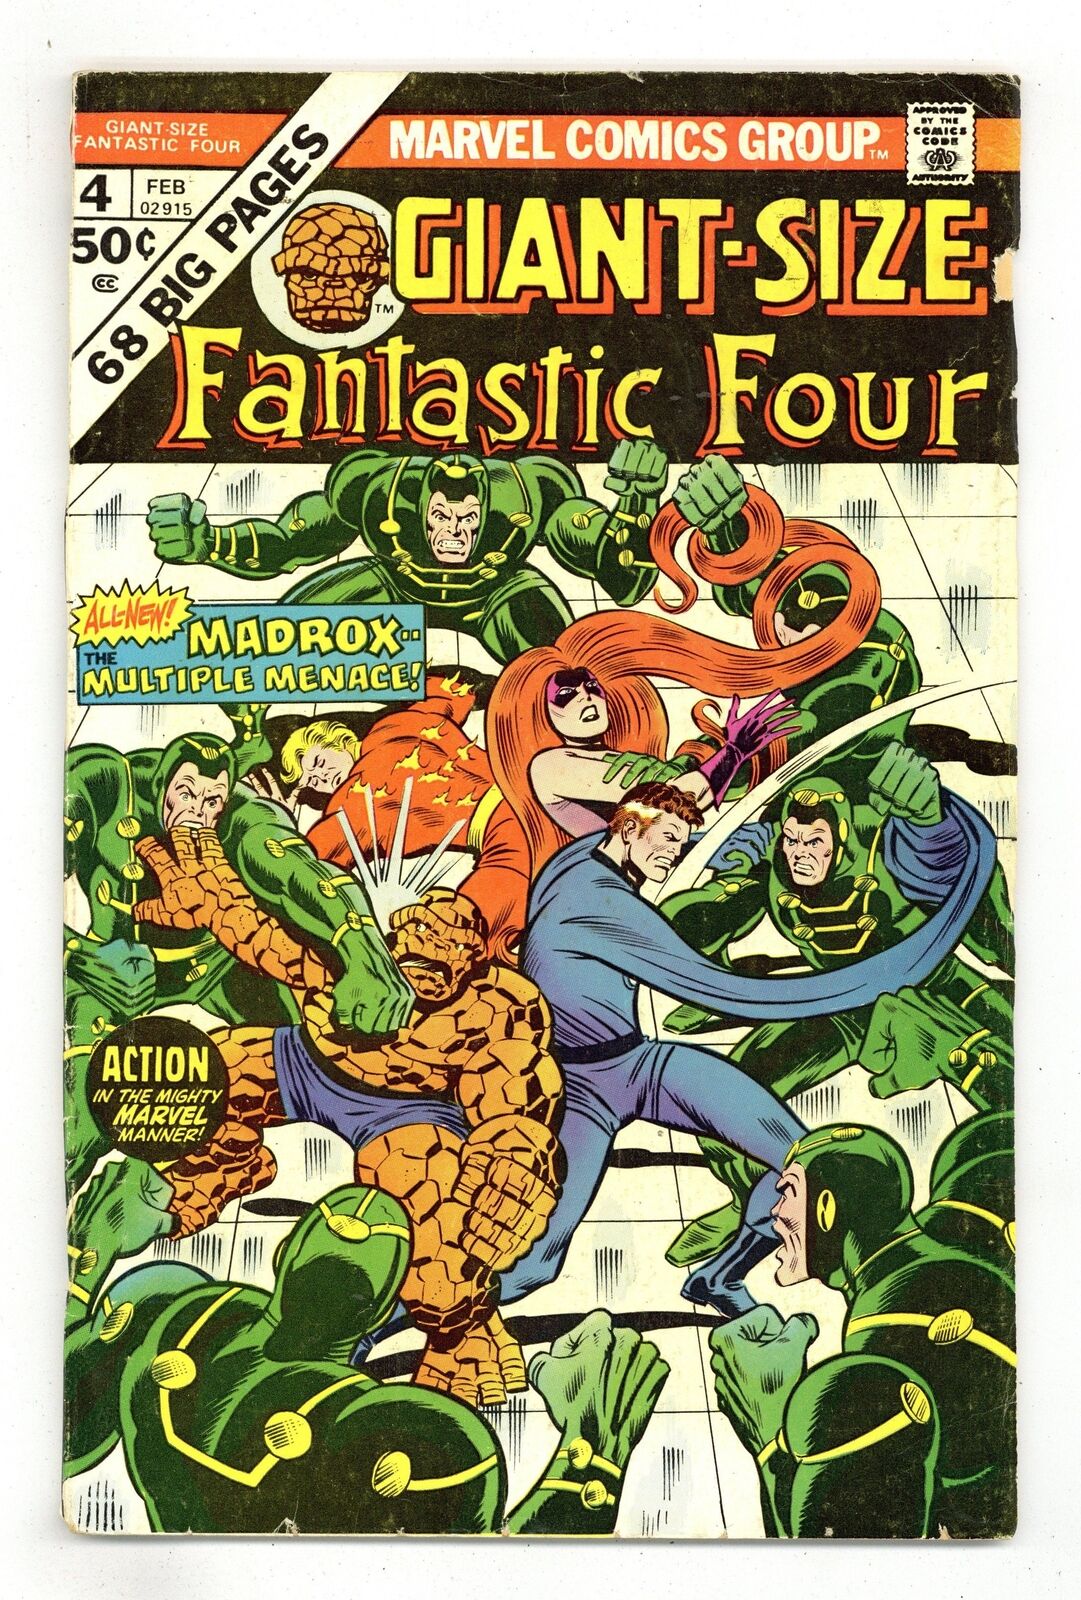 Giant Size Fantastic Four #4 VG+ 4.5 1975 1st app. Madrox